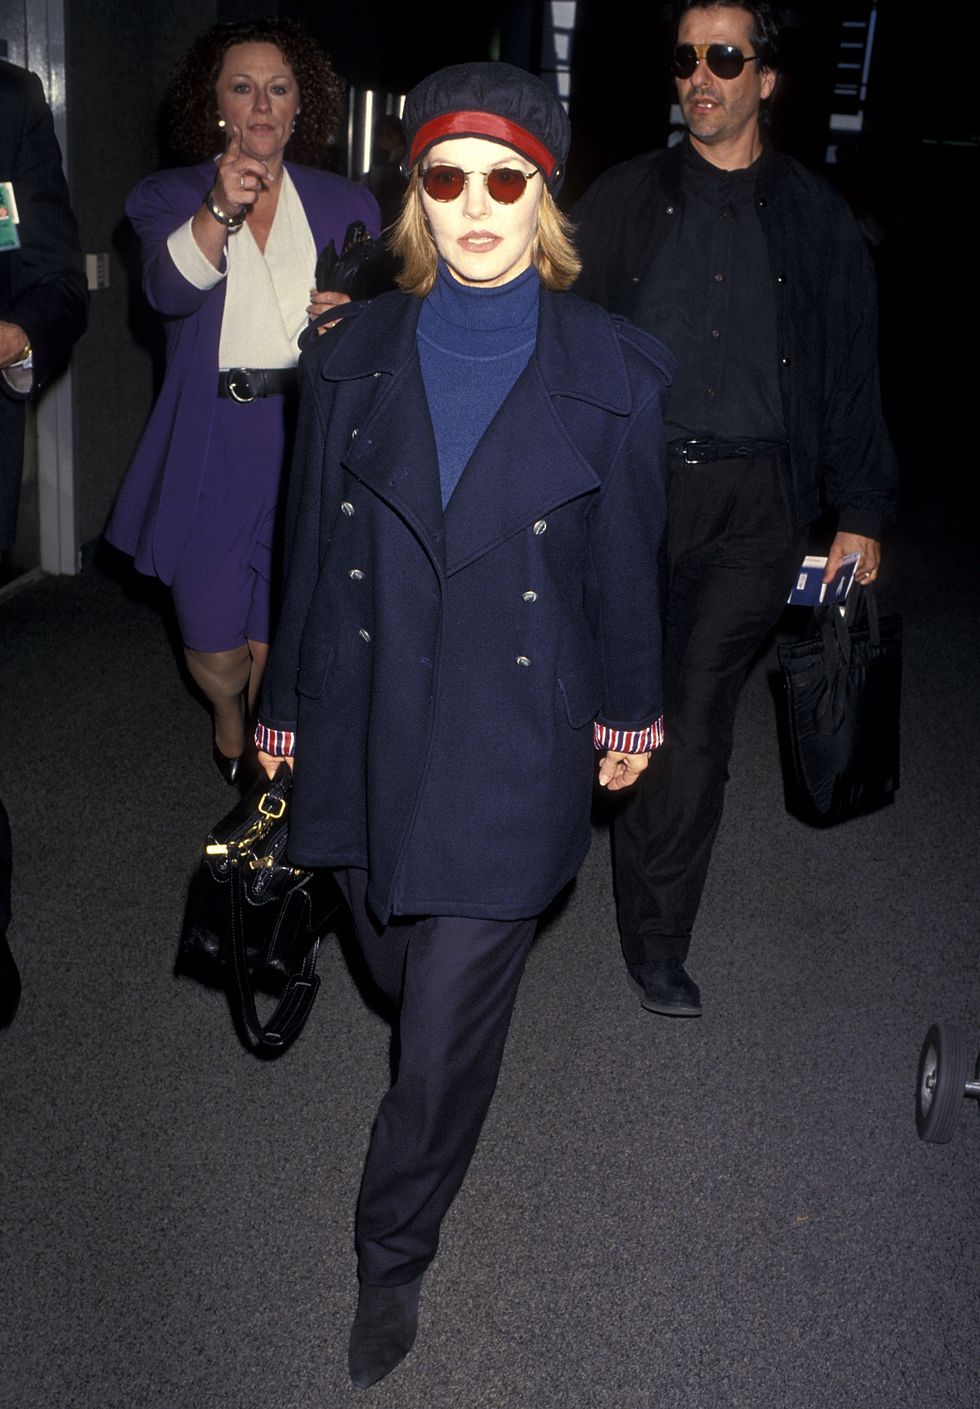 los angeles march 2 actress priscilla presley and manager joel stevens depart for new york city on march 2, 1994 from the los angeles international airport in los angeles, california photo by ron galella, ltdron galella collection via getty images